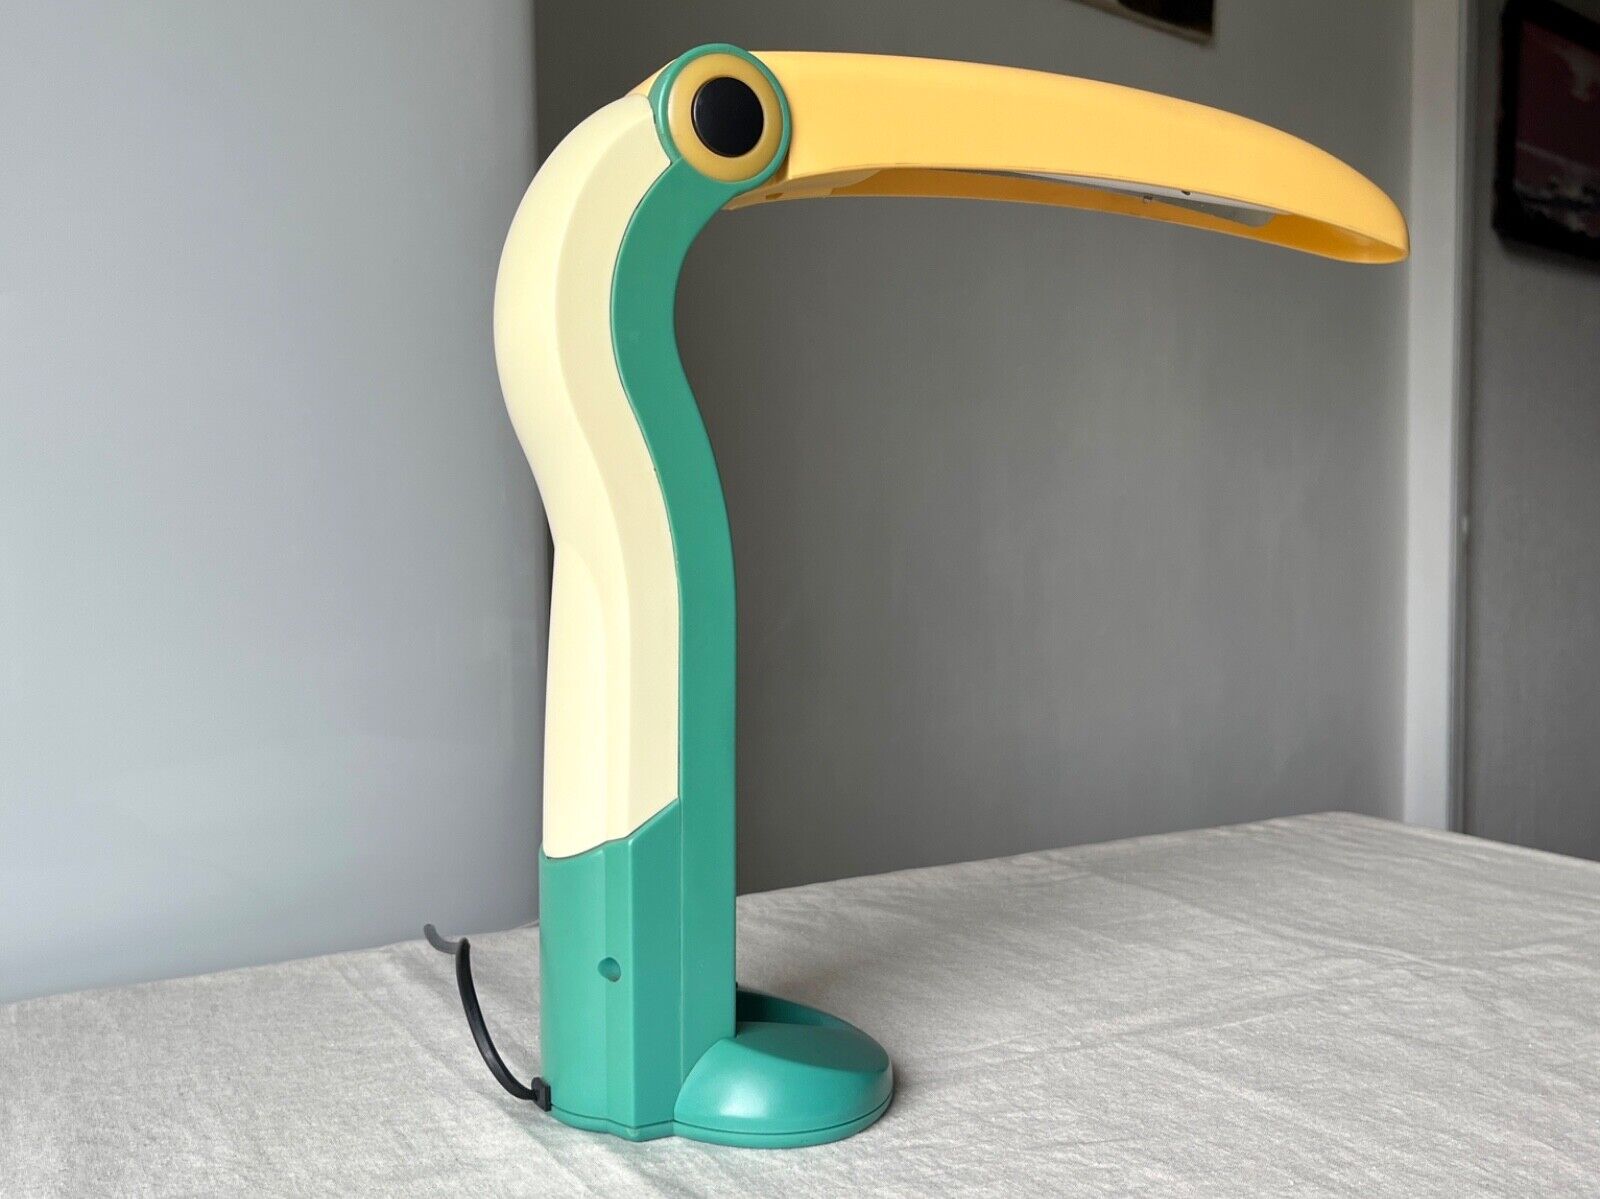 Toucan Table Lamp by H. T. Huang 1980s Vintage Mid-century modern light